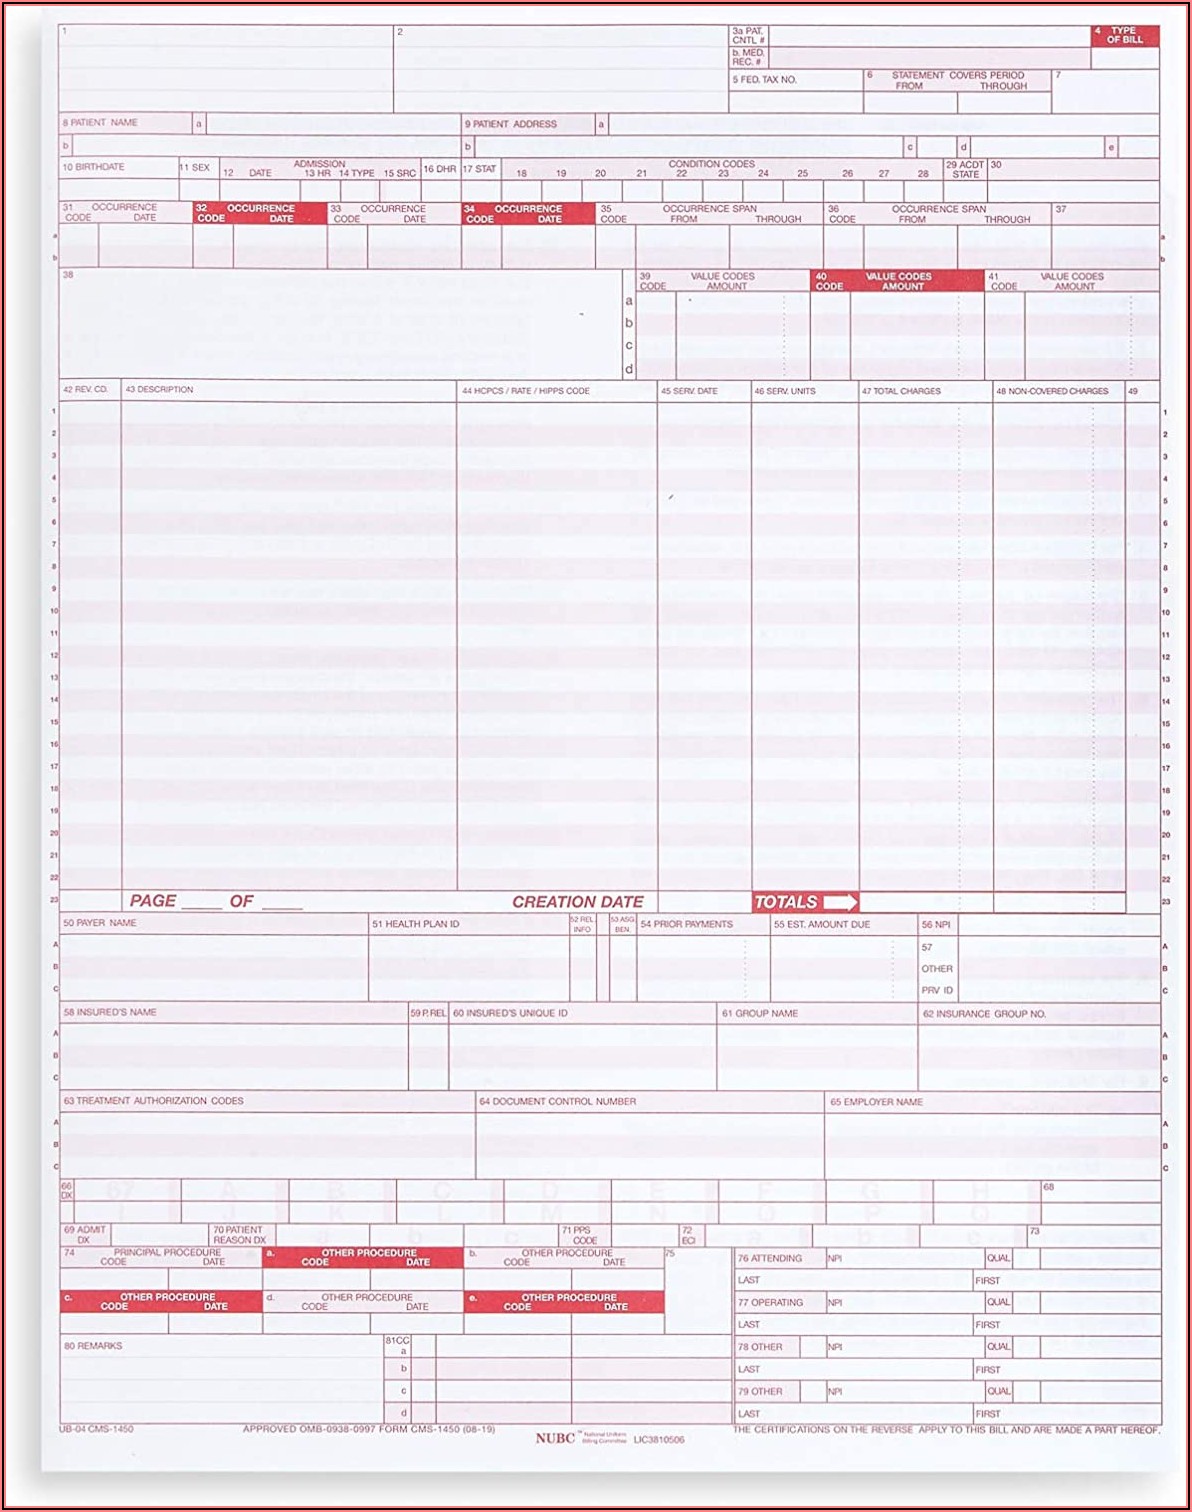 The Cms 1500 And Ub 04 Claim Forms Are Required To Be Outlined In Red To